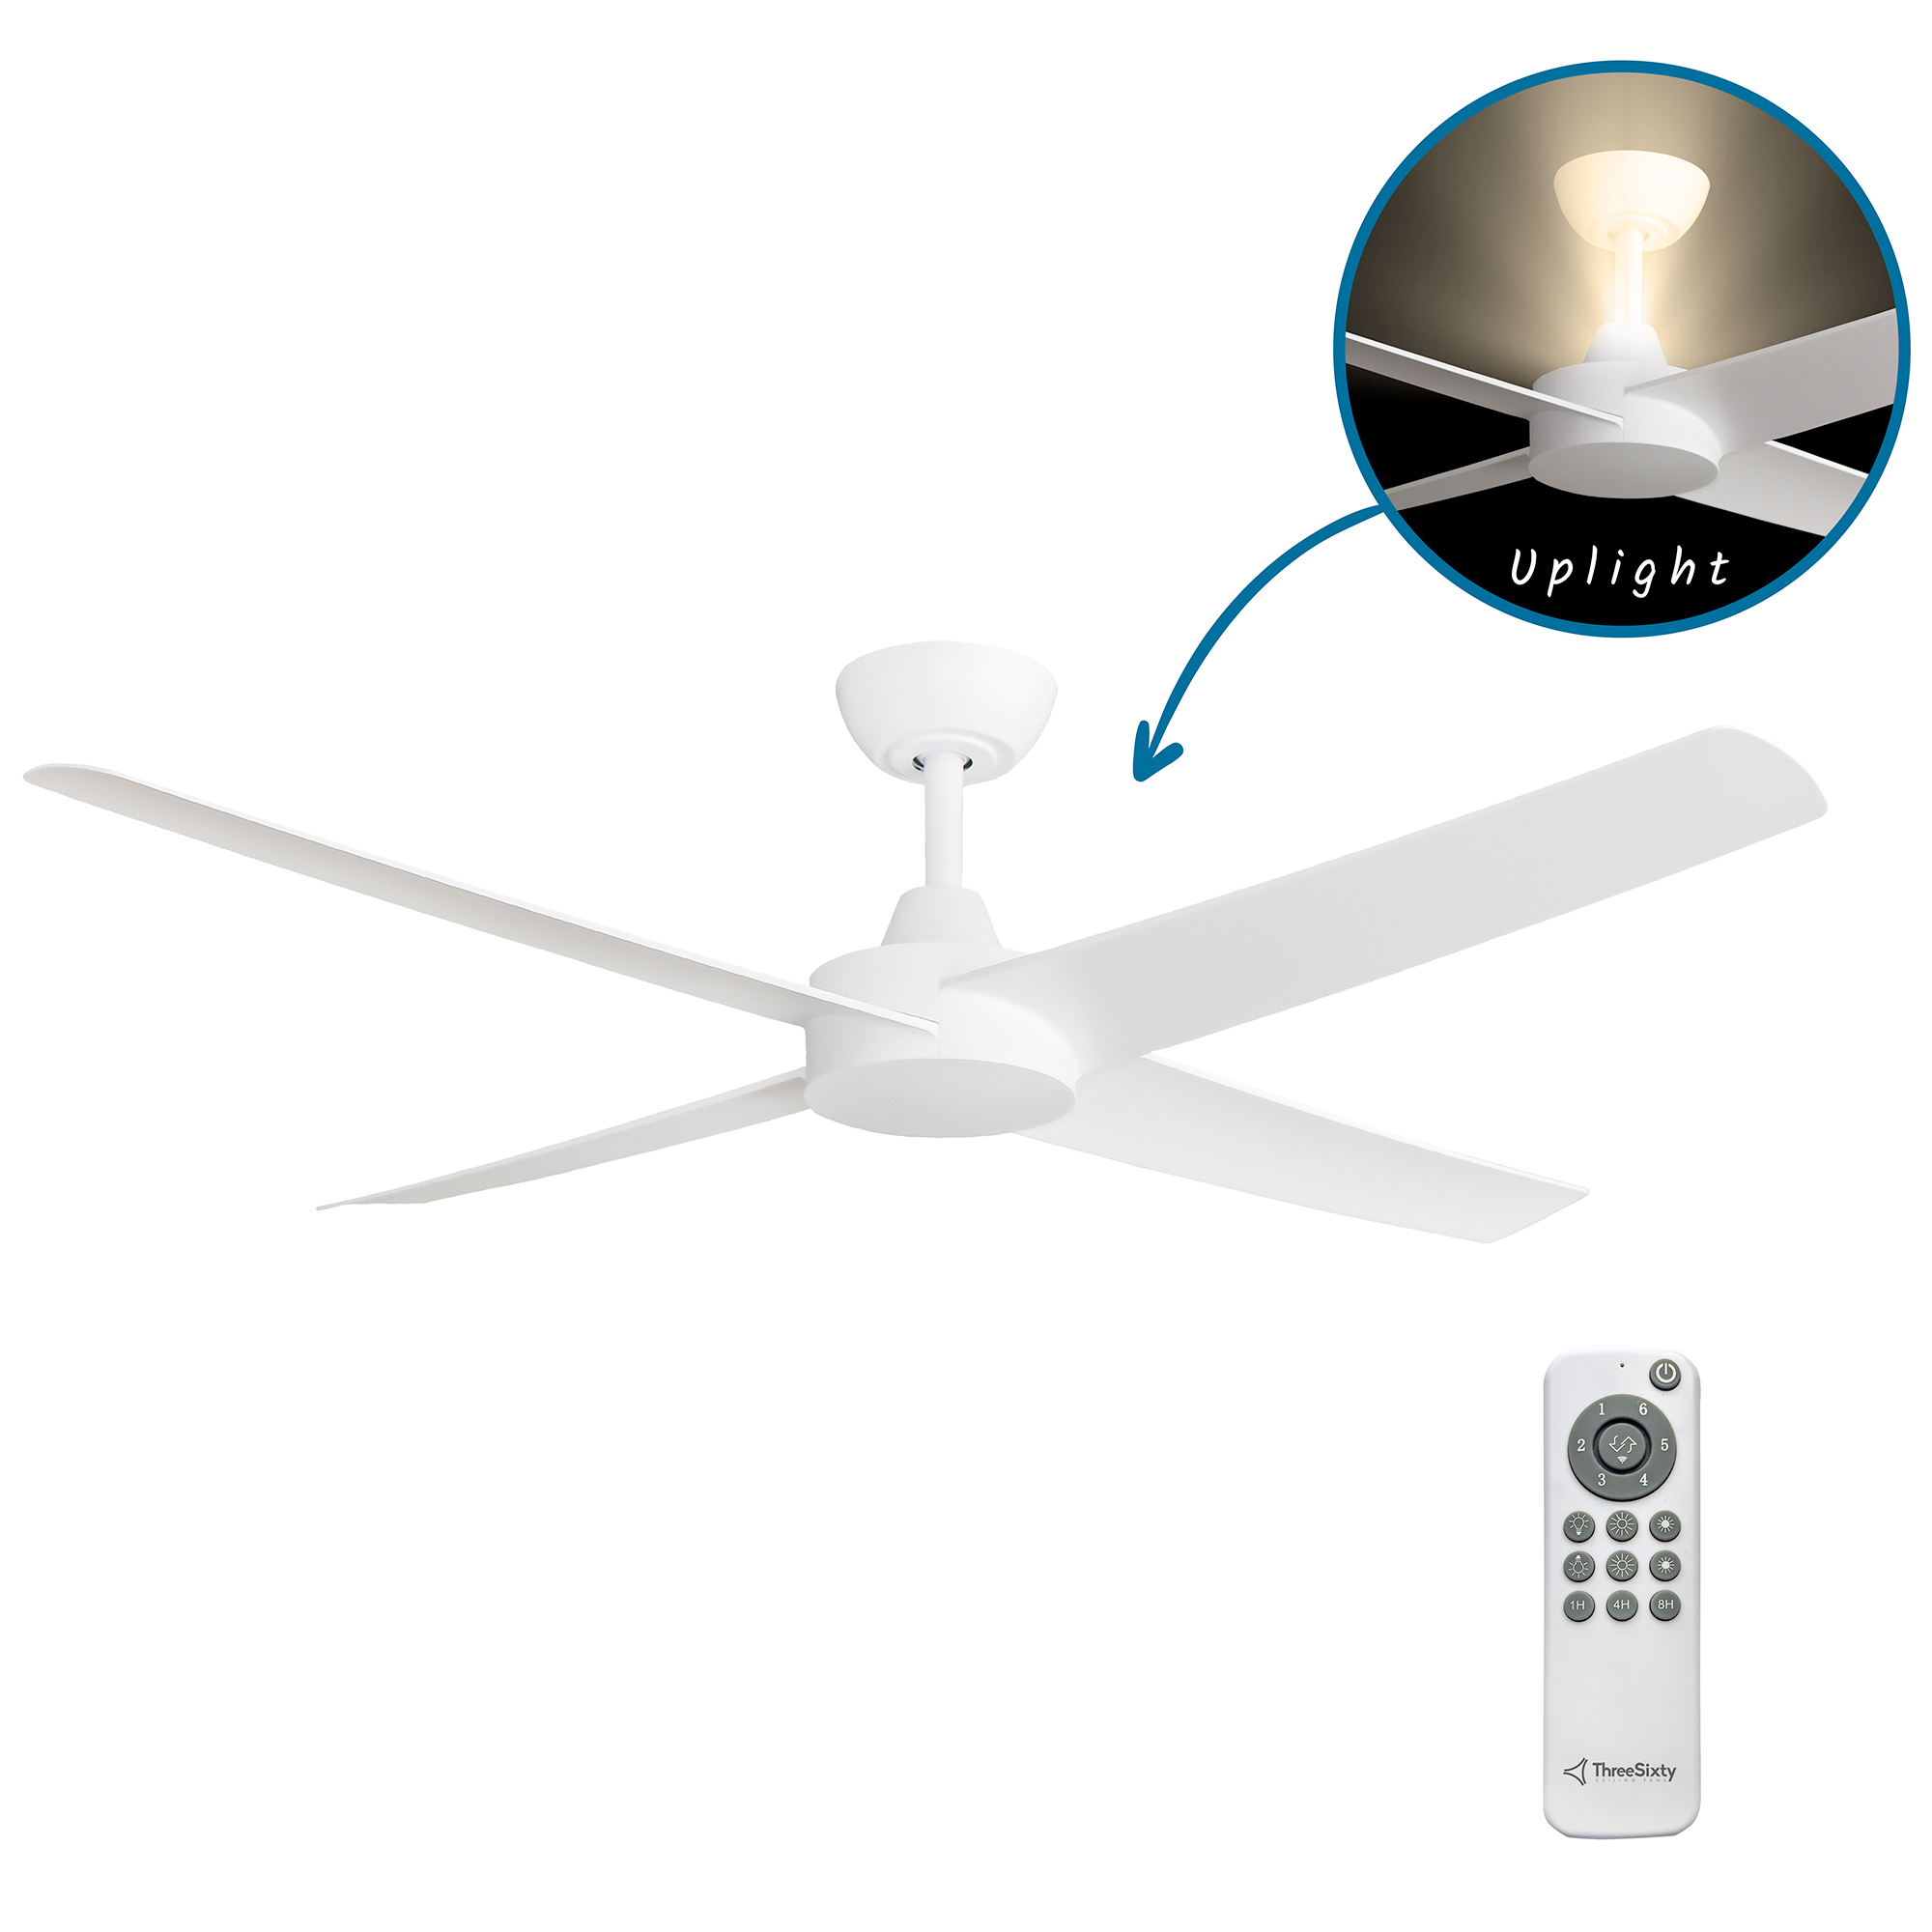 52" Ambience DC Ceiling Fan in Matte White with Uplight